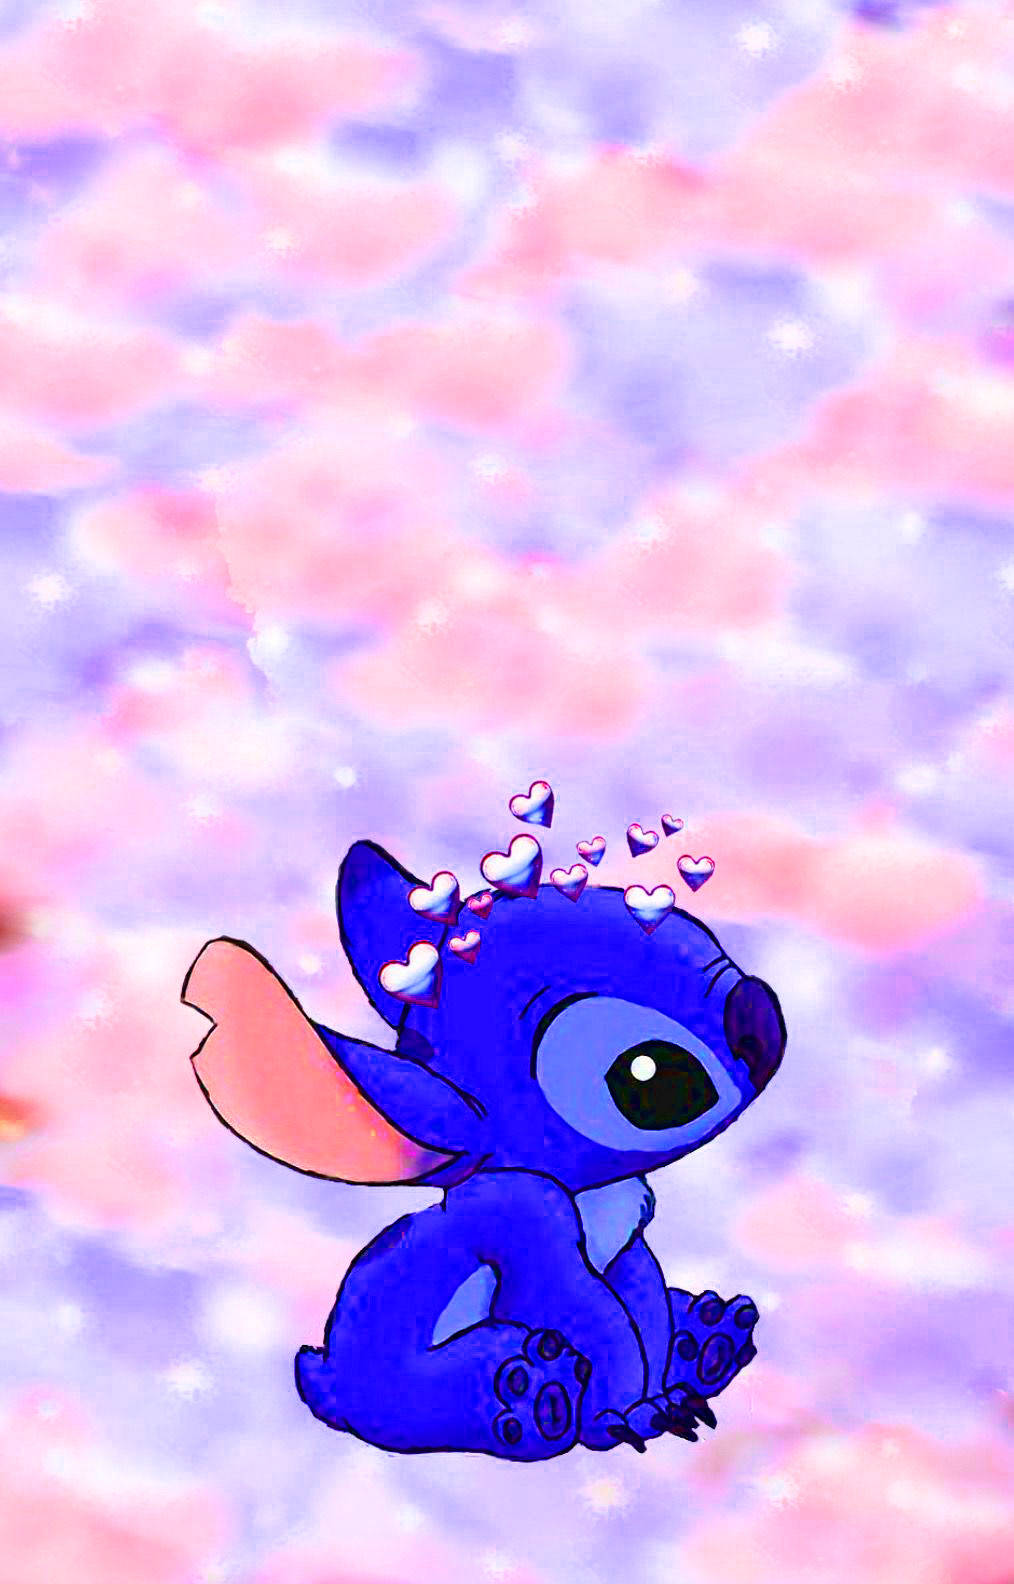 Stitch out of space galaxy wallpaper for your phone background  stitchlovers  Fondos de galaxia Fondos de pantalla galaxia Fondo de  pantalla animado